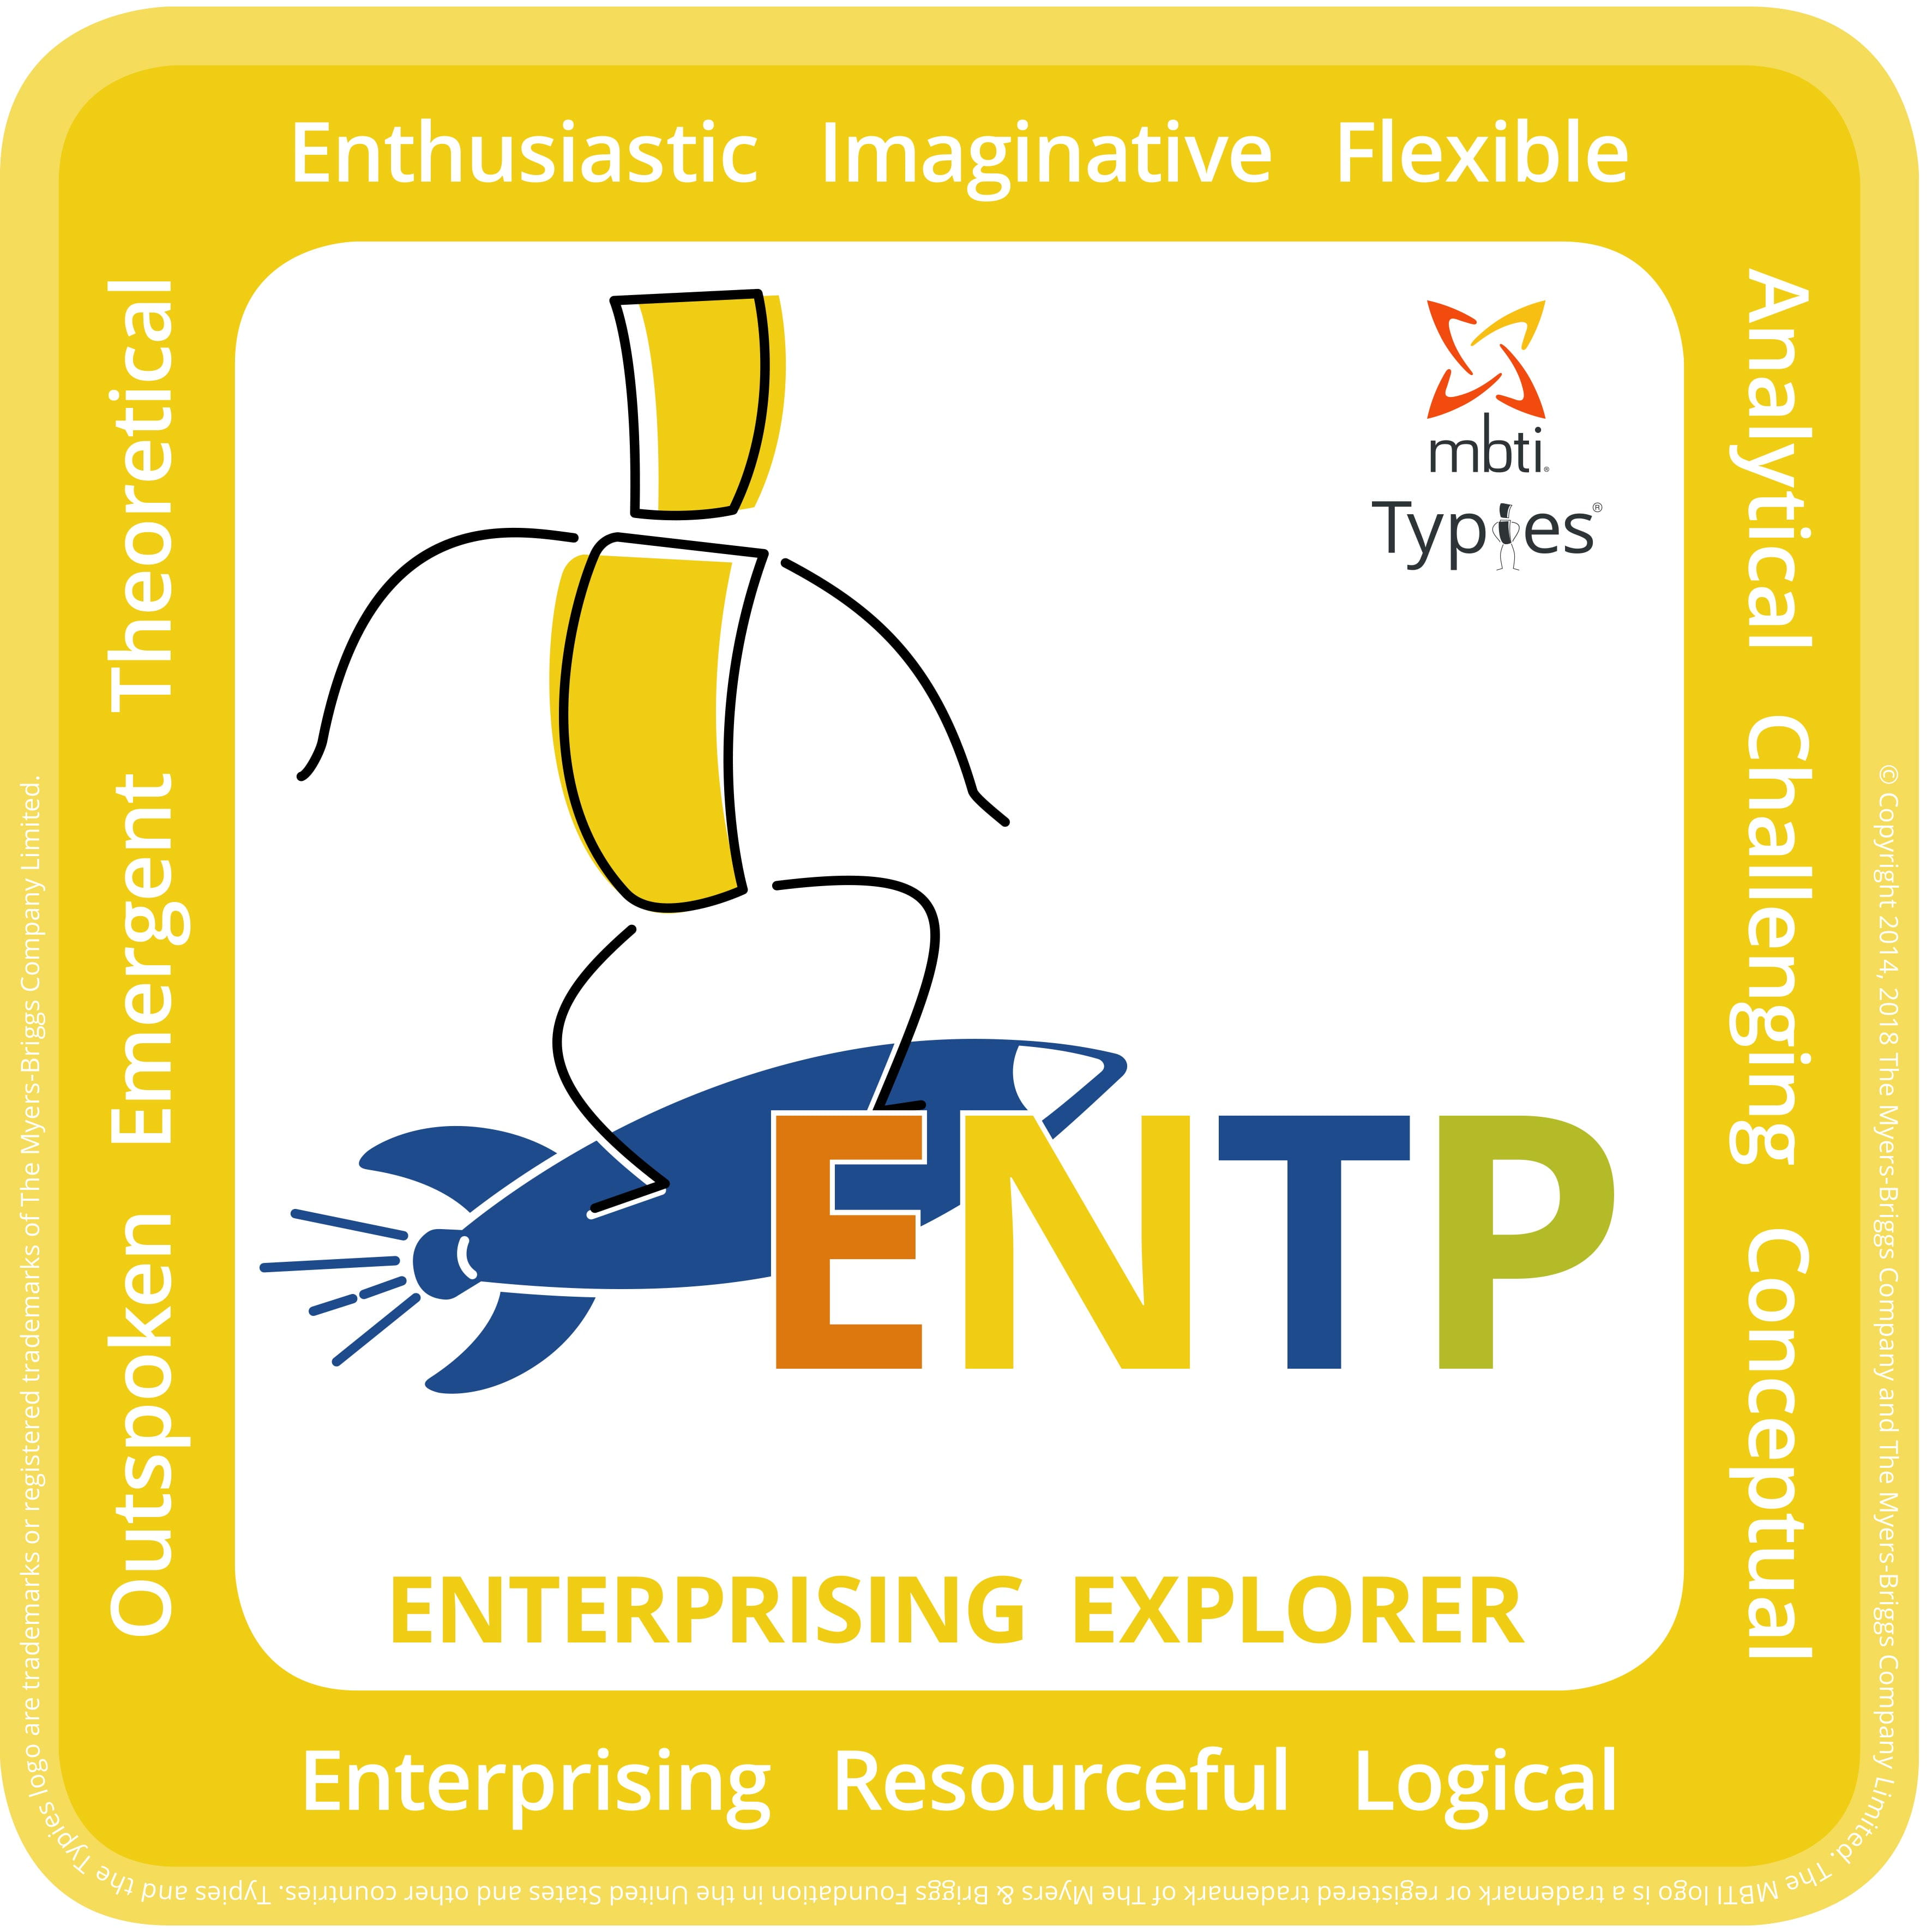 Typical characteristics of an ENTP